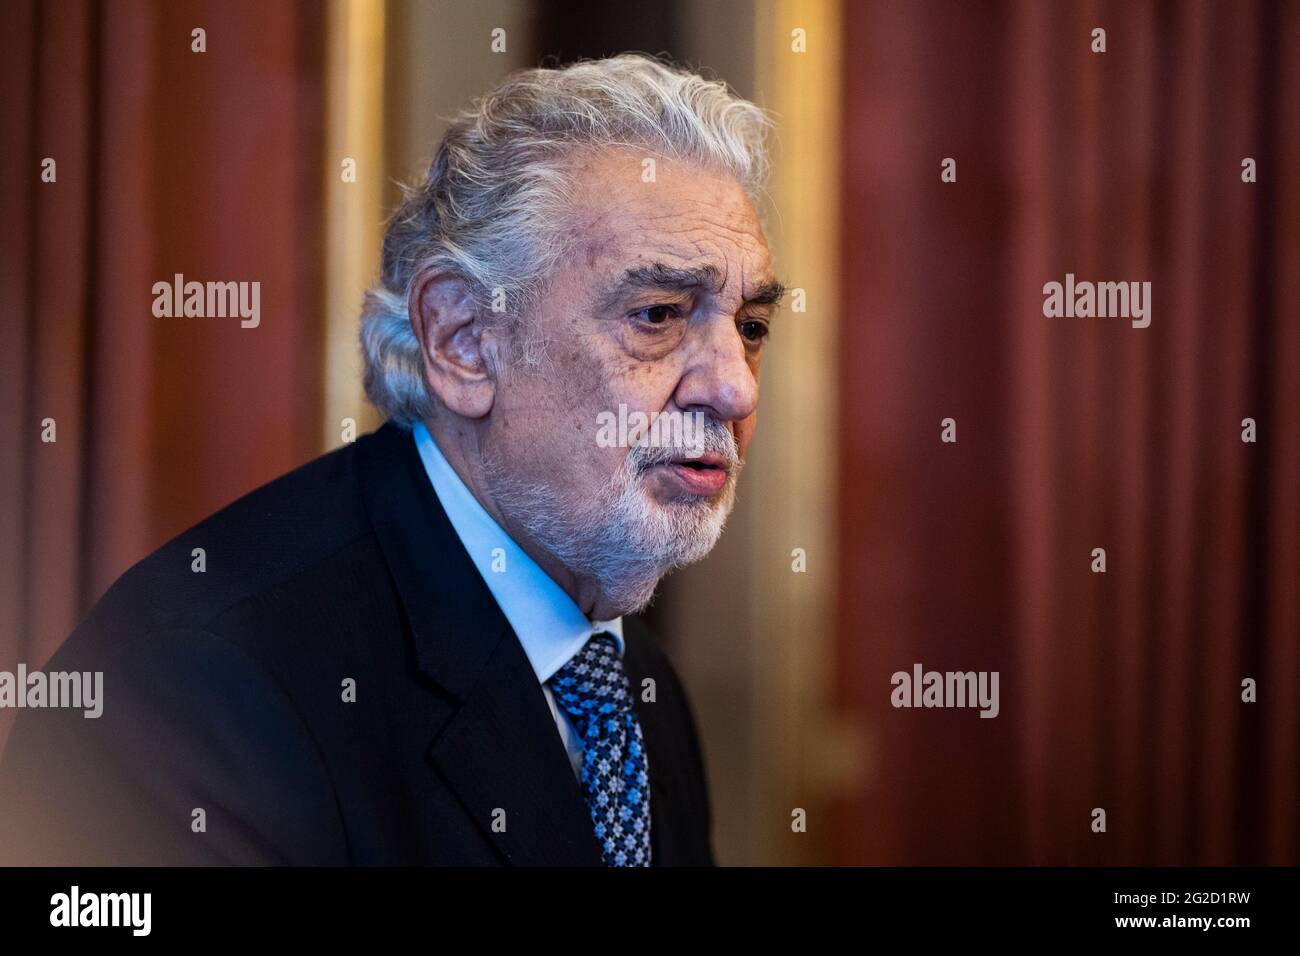 The tenor Placido Domingo makes a speech as he receives the title of 'Honorary Ambassador of the World Heritage of Spain' at the Teatro Real, Madrid. Domingo receives this title coinciding with his return to Spain to perform at two concerts, in Madrid and Marbella. The emblem is given to him by the association ADIPROPE (Association for the Diffusion and Promotion of the World Heritage of Spain), dedicated to caring for and promoting knowledge of Spain's World Heritage. (Photo by Oscar Fuentes / SOPA Images/Sipa USA) Stock Photo